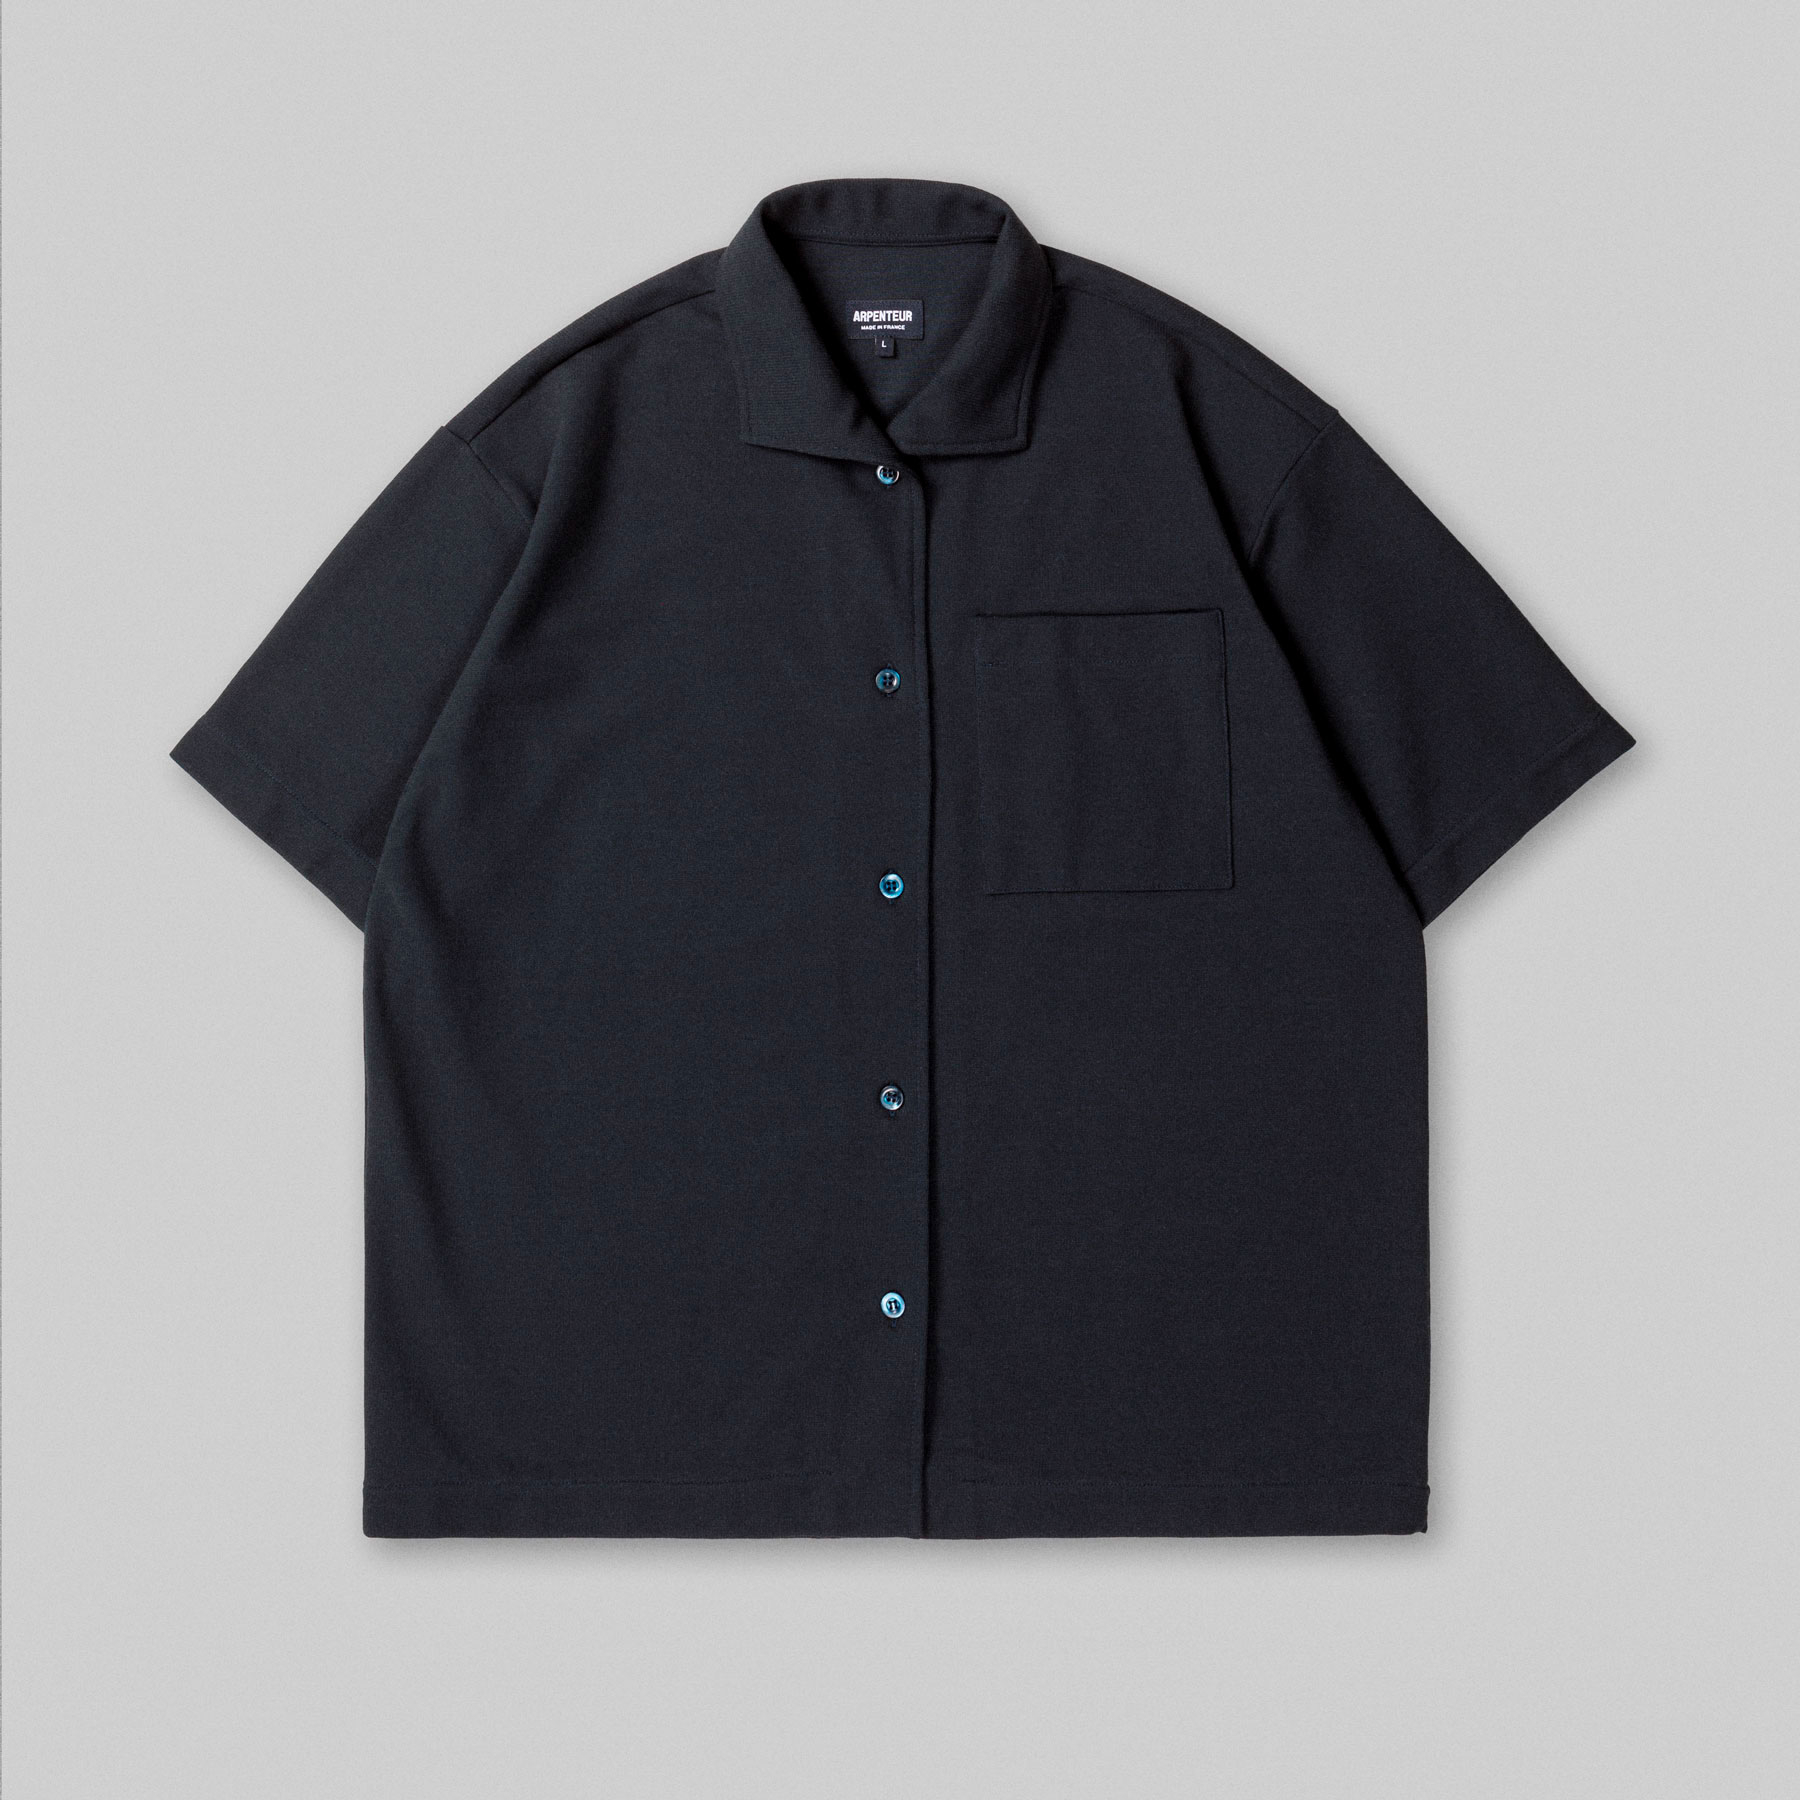 CORAL short sleeve shirt by Arpenteur in Midnight color